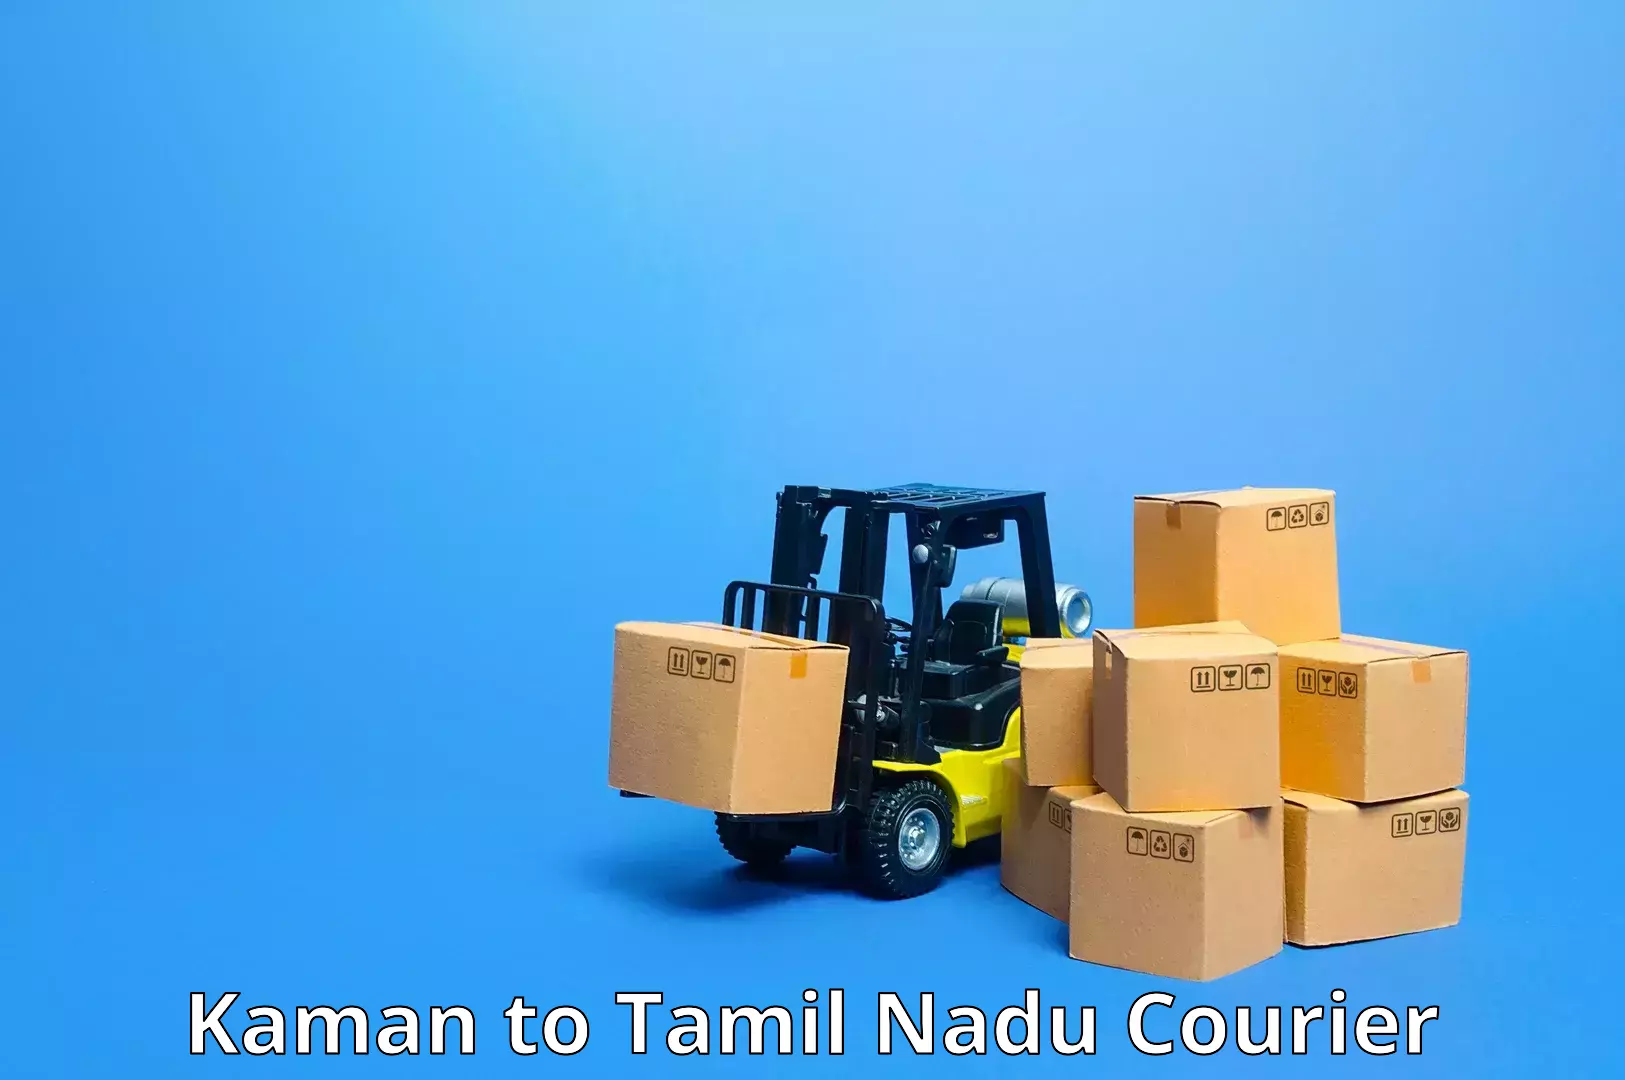 Nationwide delivery network Kaman to Tuticorin Port